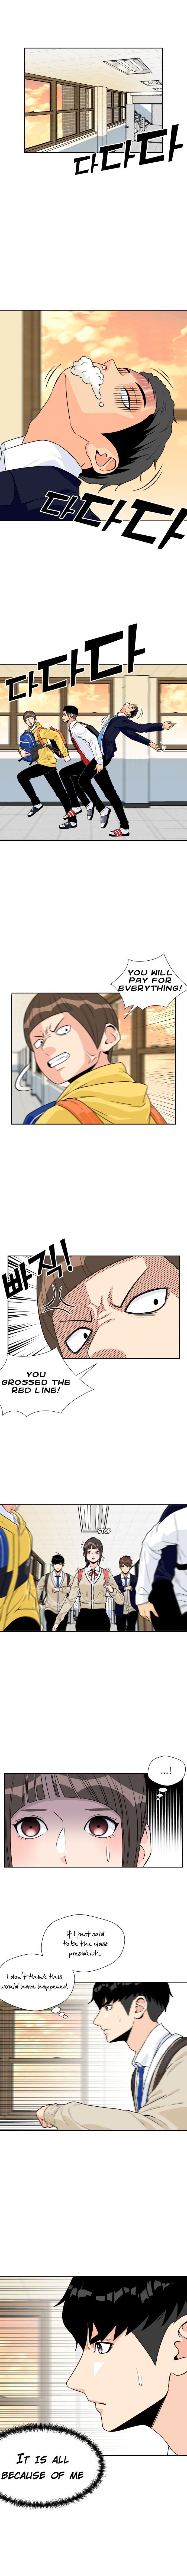 Face Genius Chapter 8 page 3